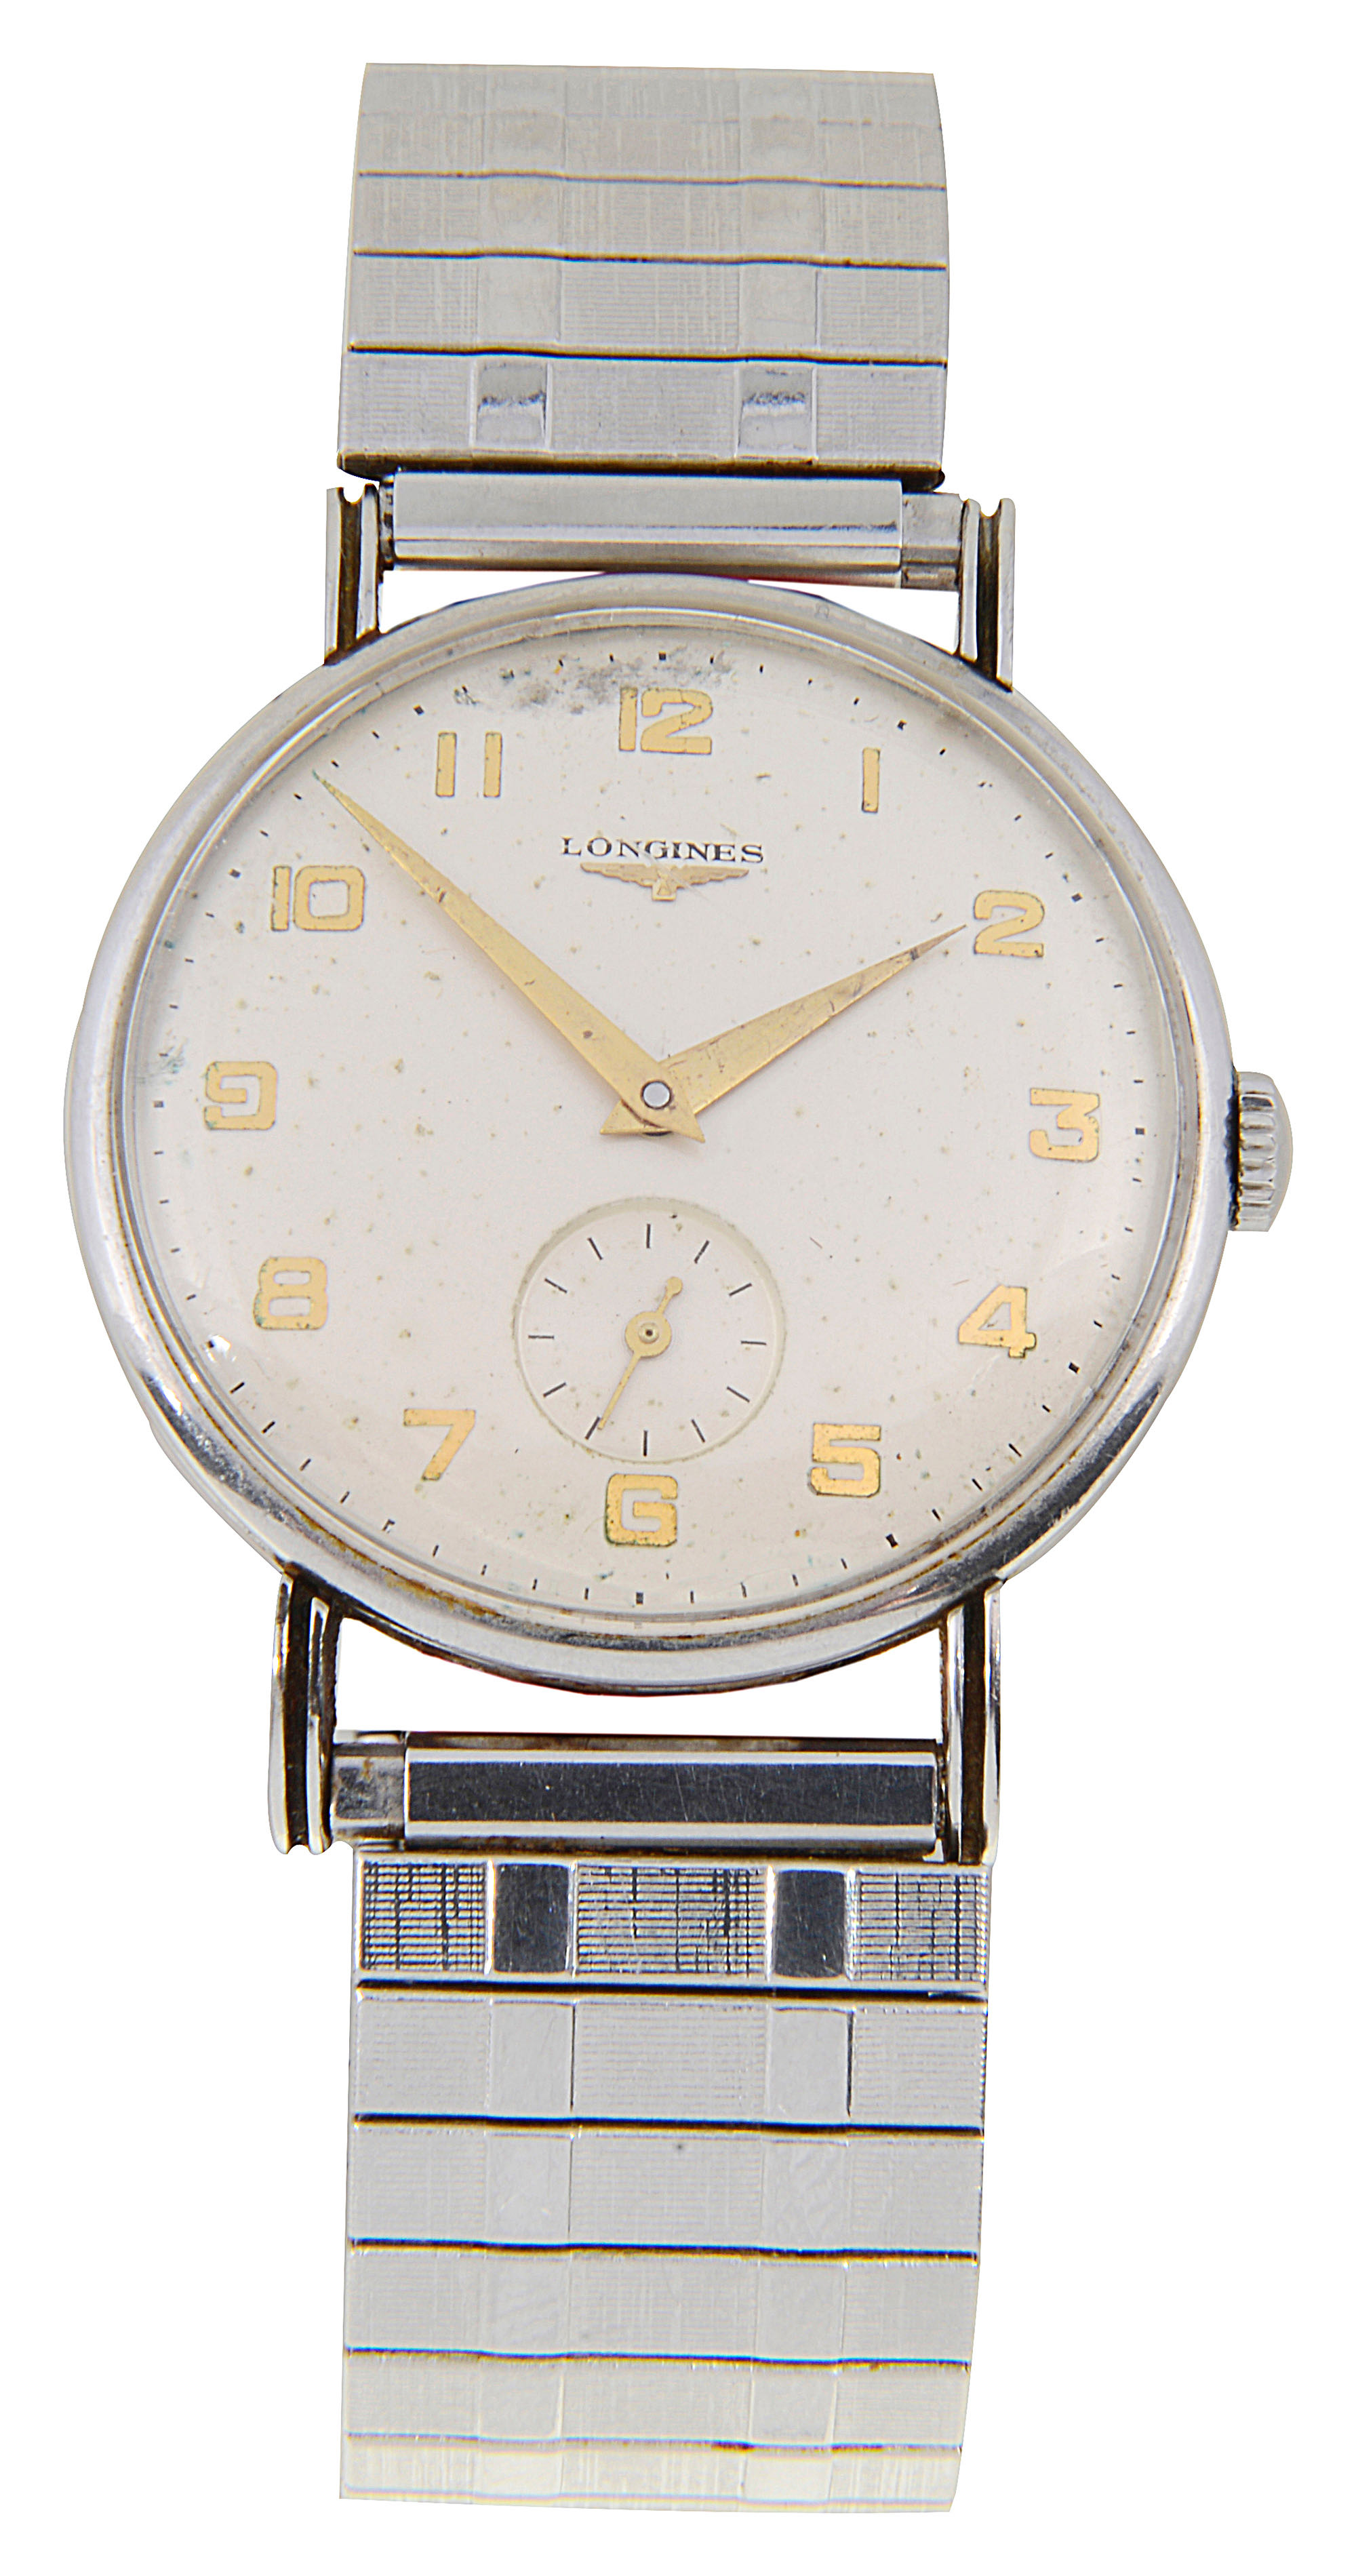 A Gentleman's Longines stainless steel wristwatch - Image 4 of 4